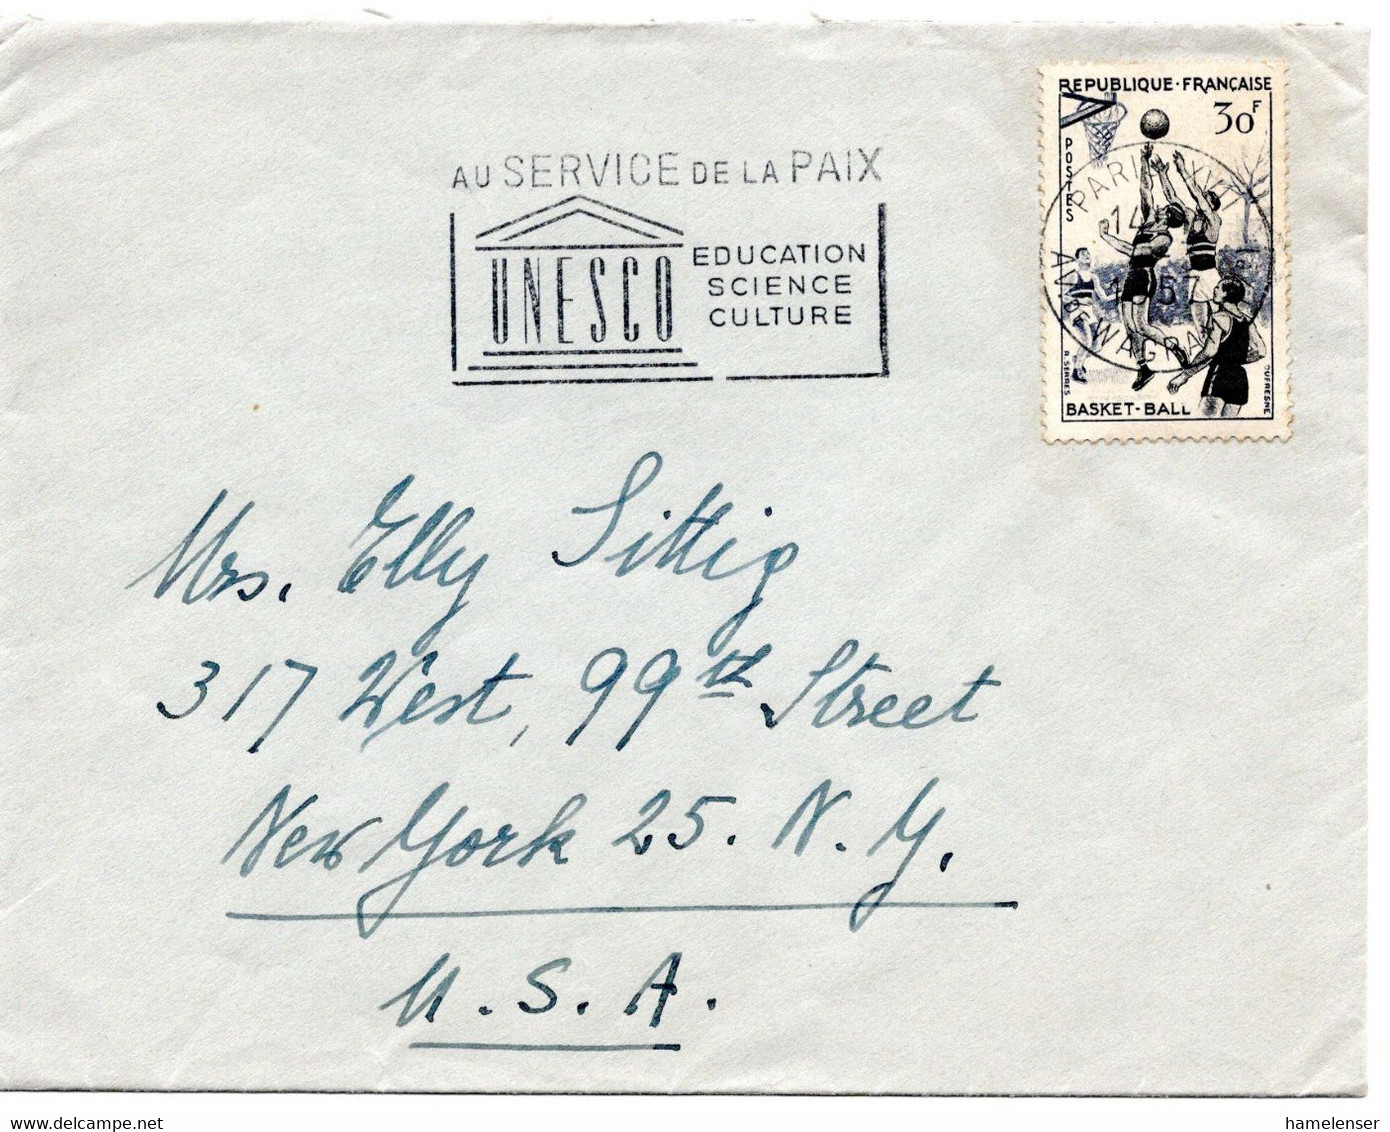 64221 - Frankreich - 1957 - 30F Basketball EF A Bf PARIS - ... UNESCO ... -> New York, NY (USA) - Covers & Documents